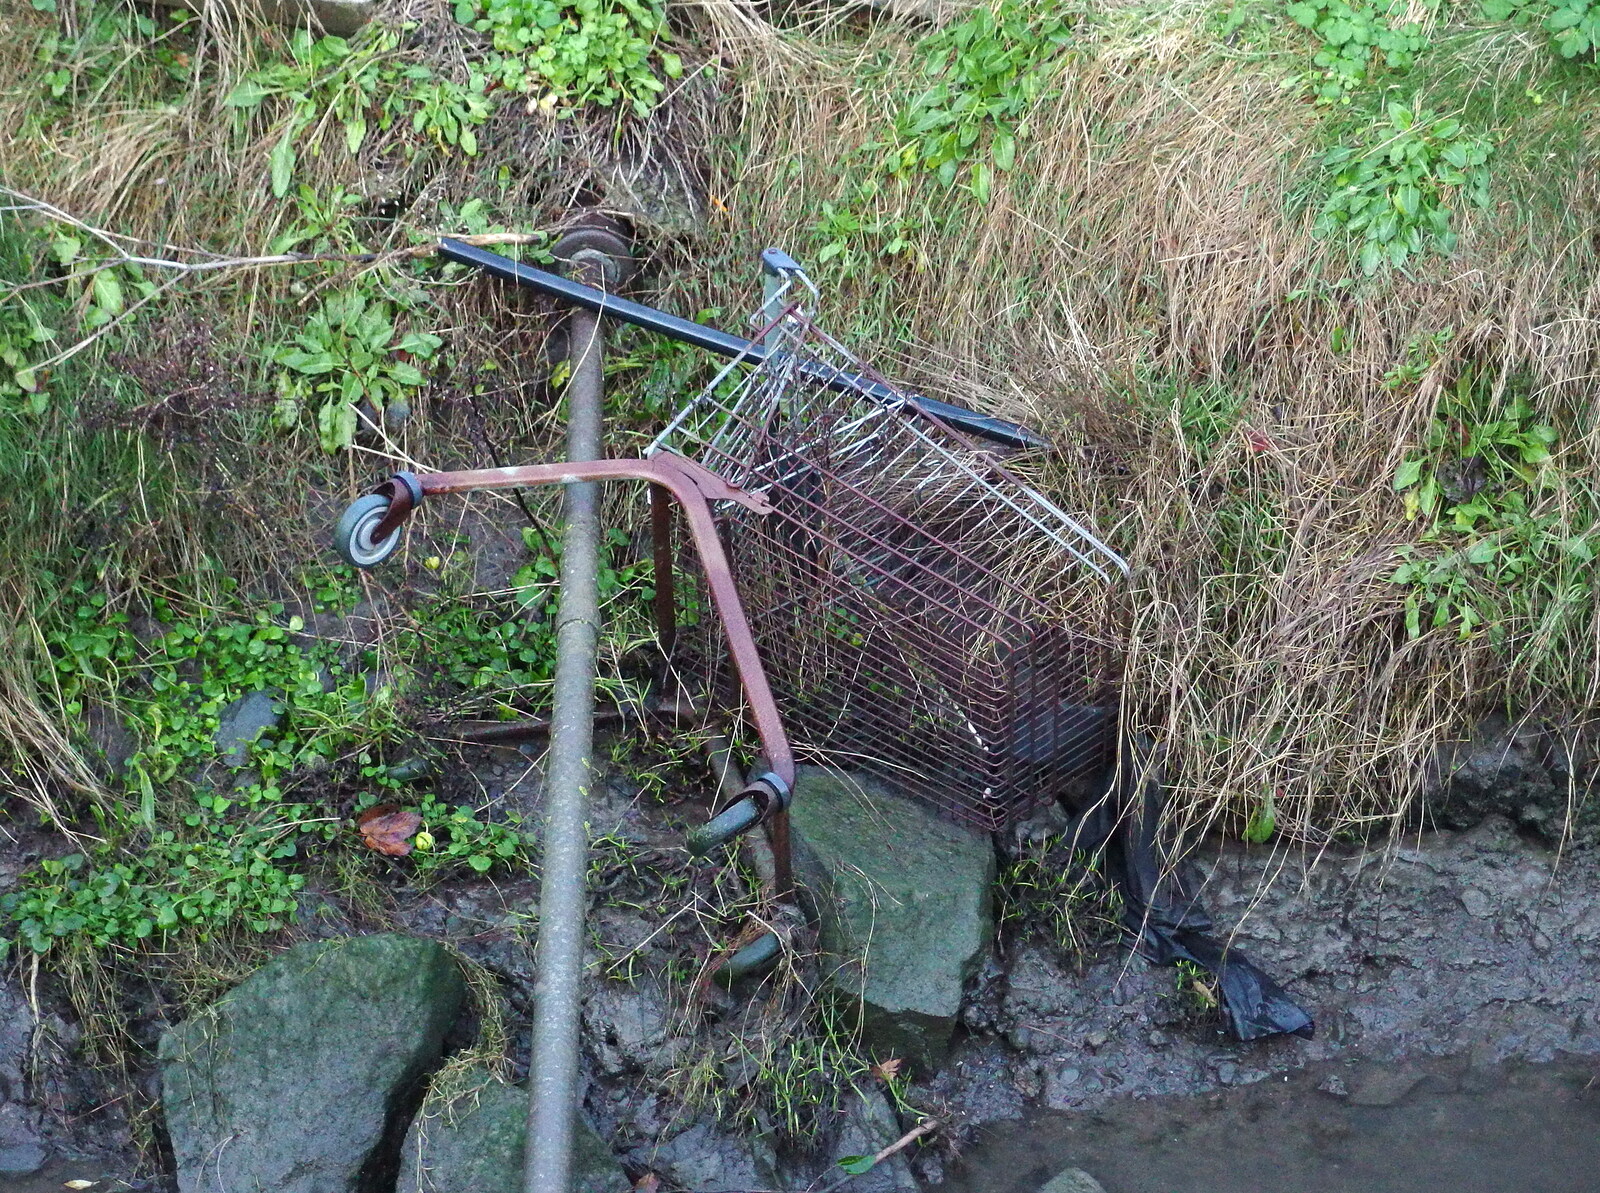 A discarded shopping trolley from Dun Laoghaire and an Electrical Disaster, Monkstown, County Dublin, Ireland - 4th January 2014